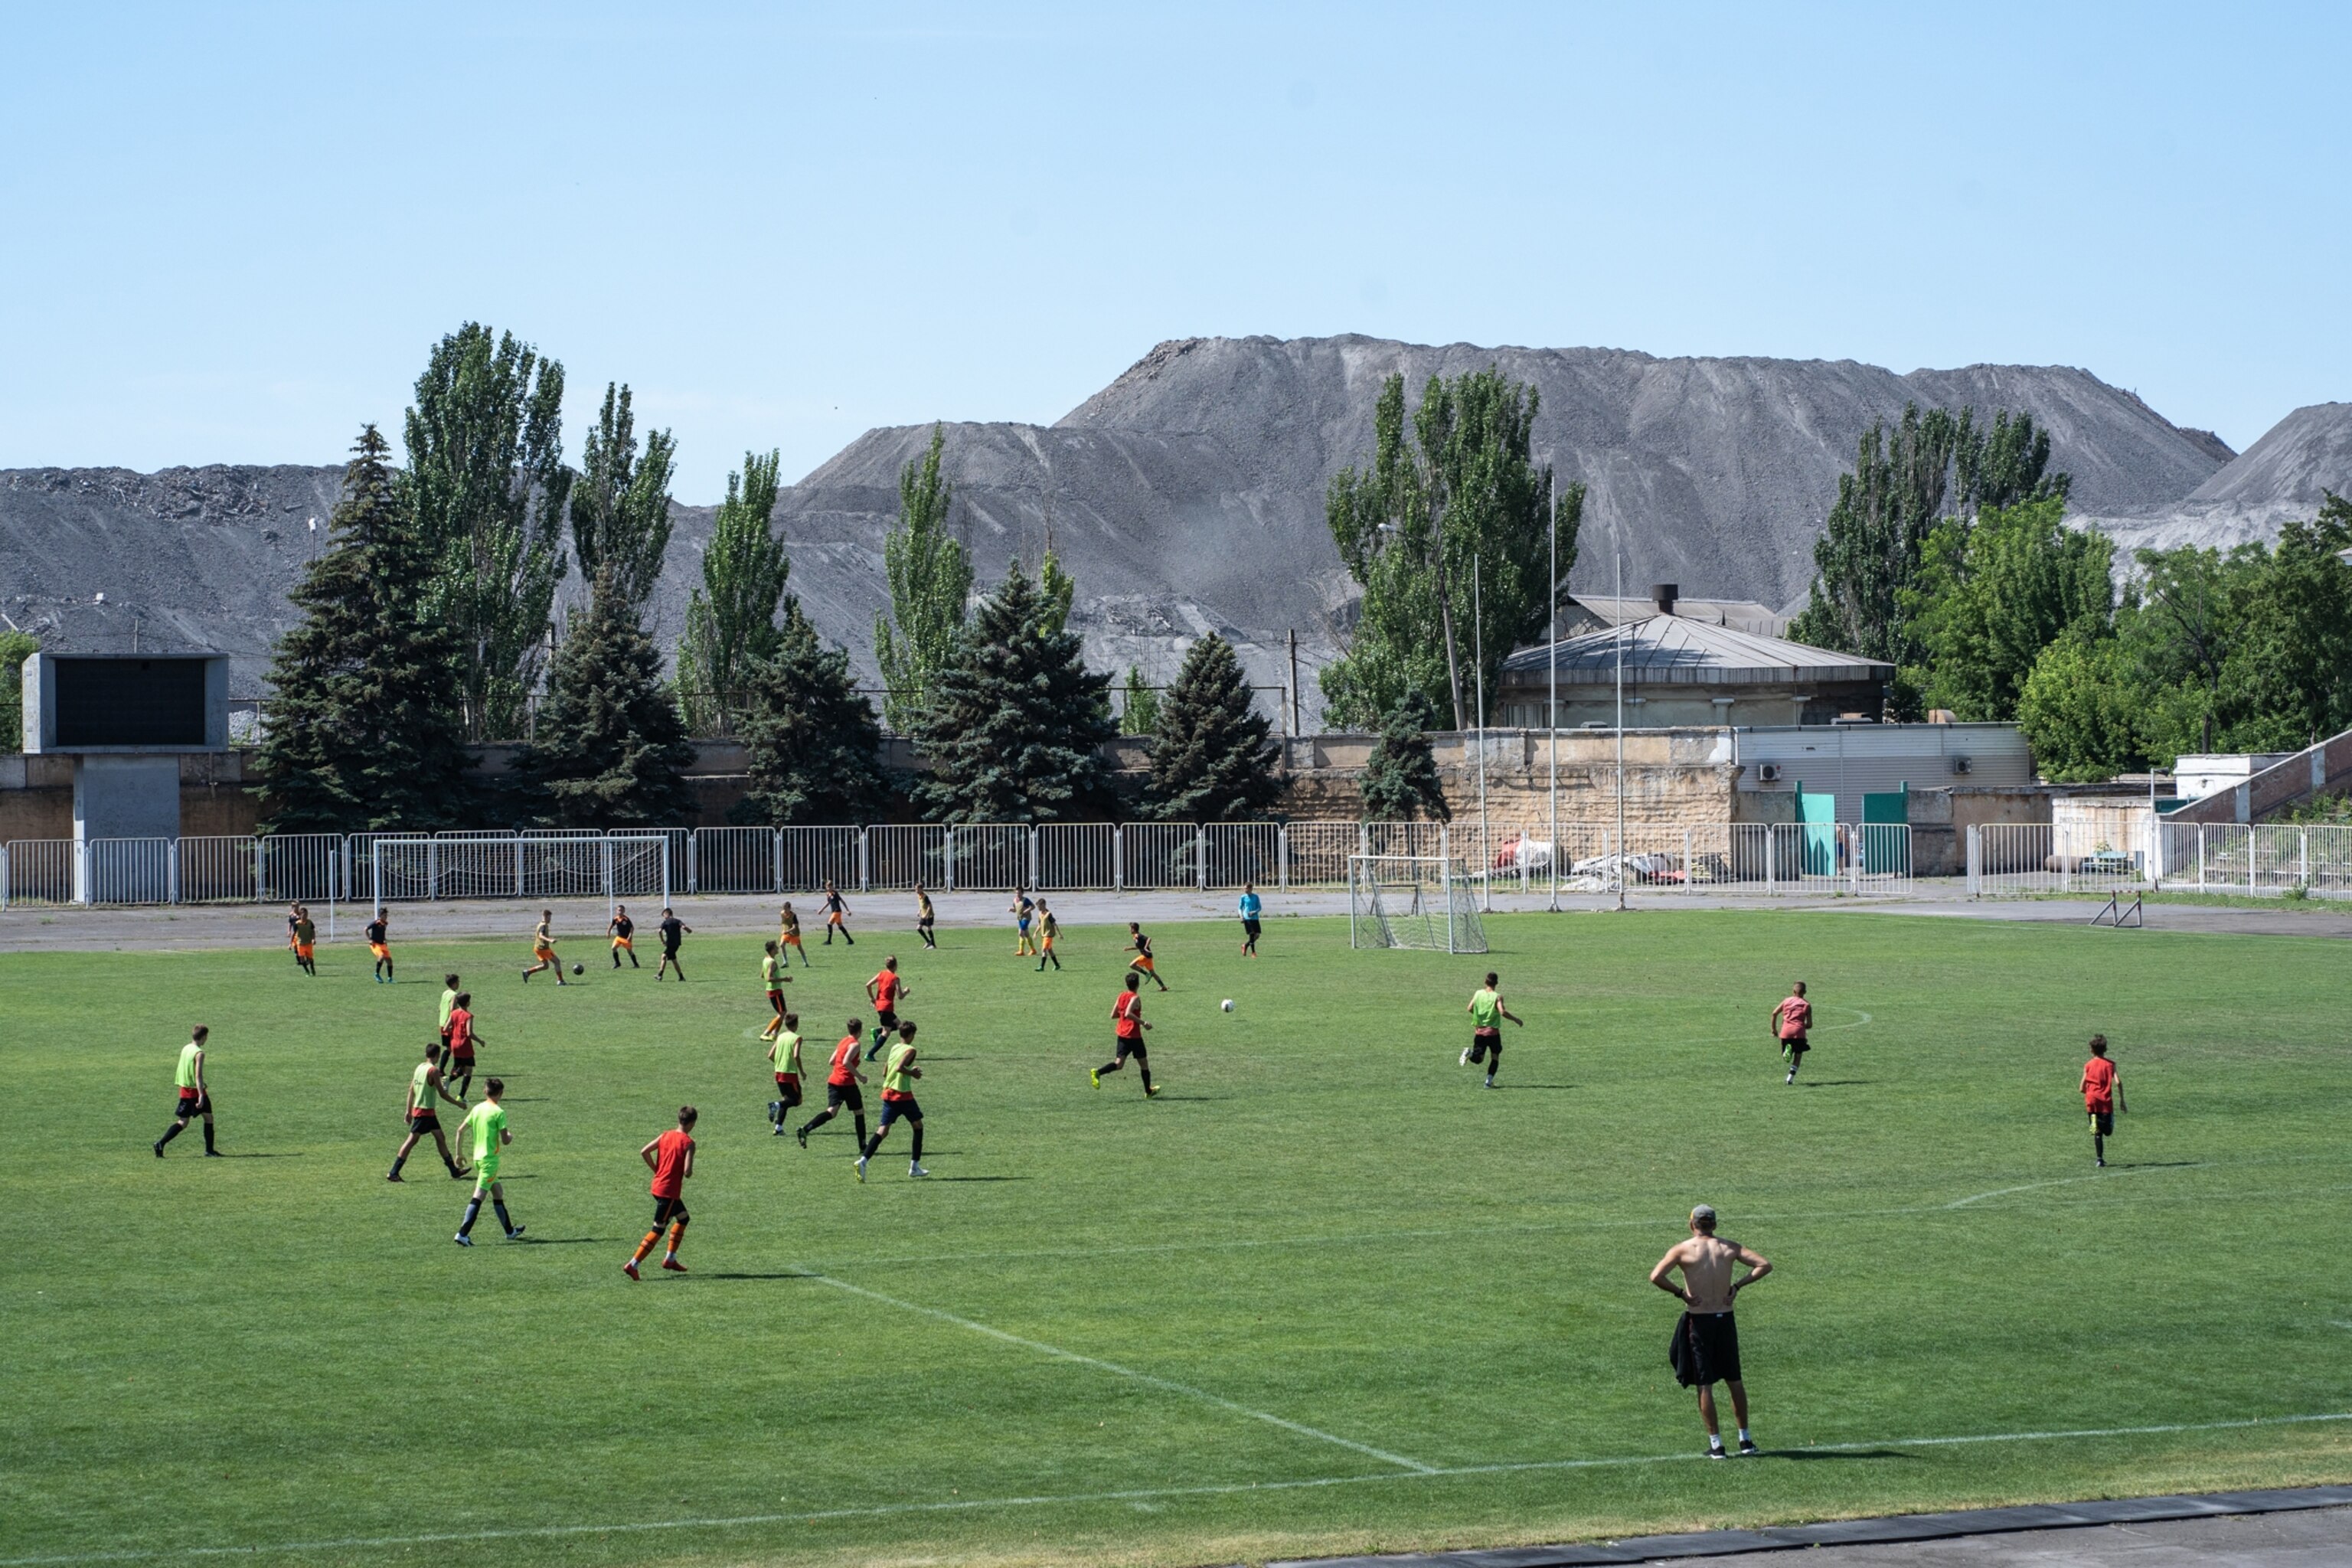 a soccer team plays in a field with a looming slagheap right behind the field